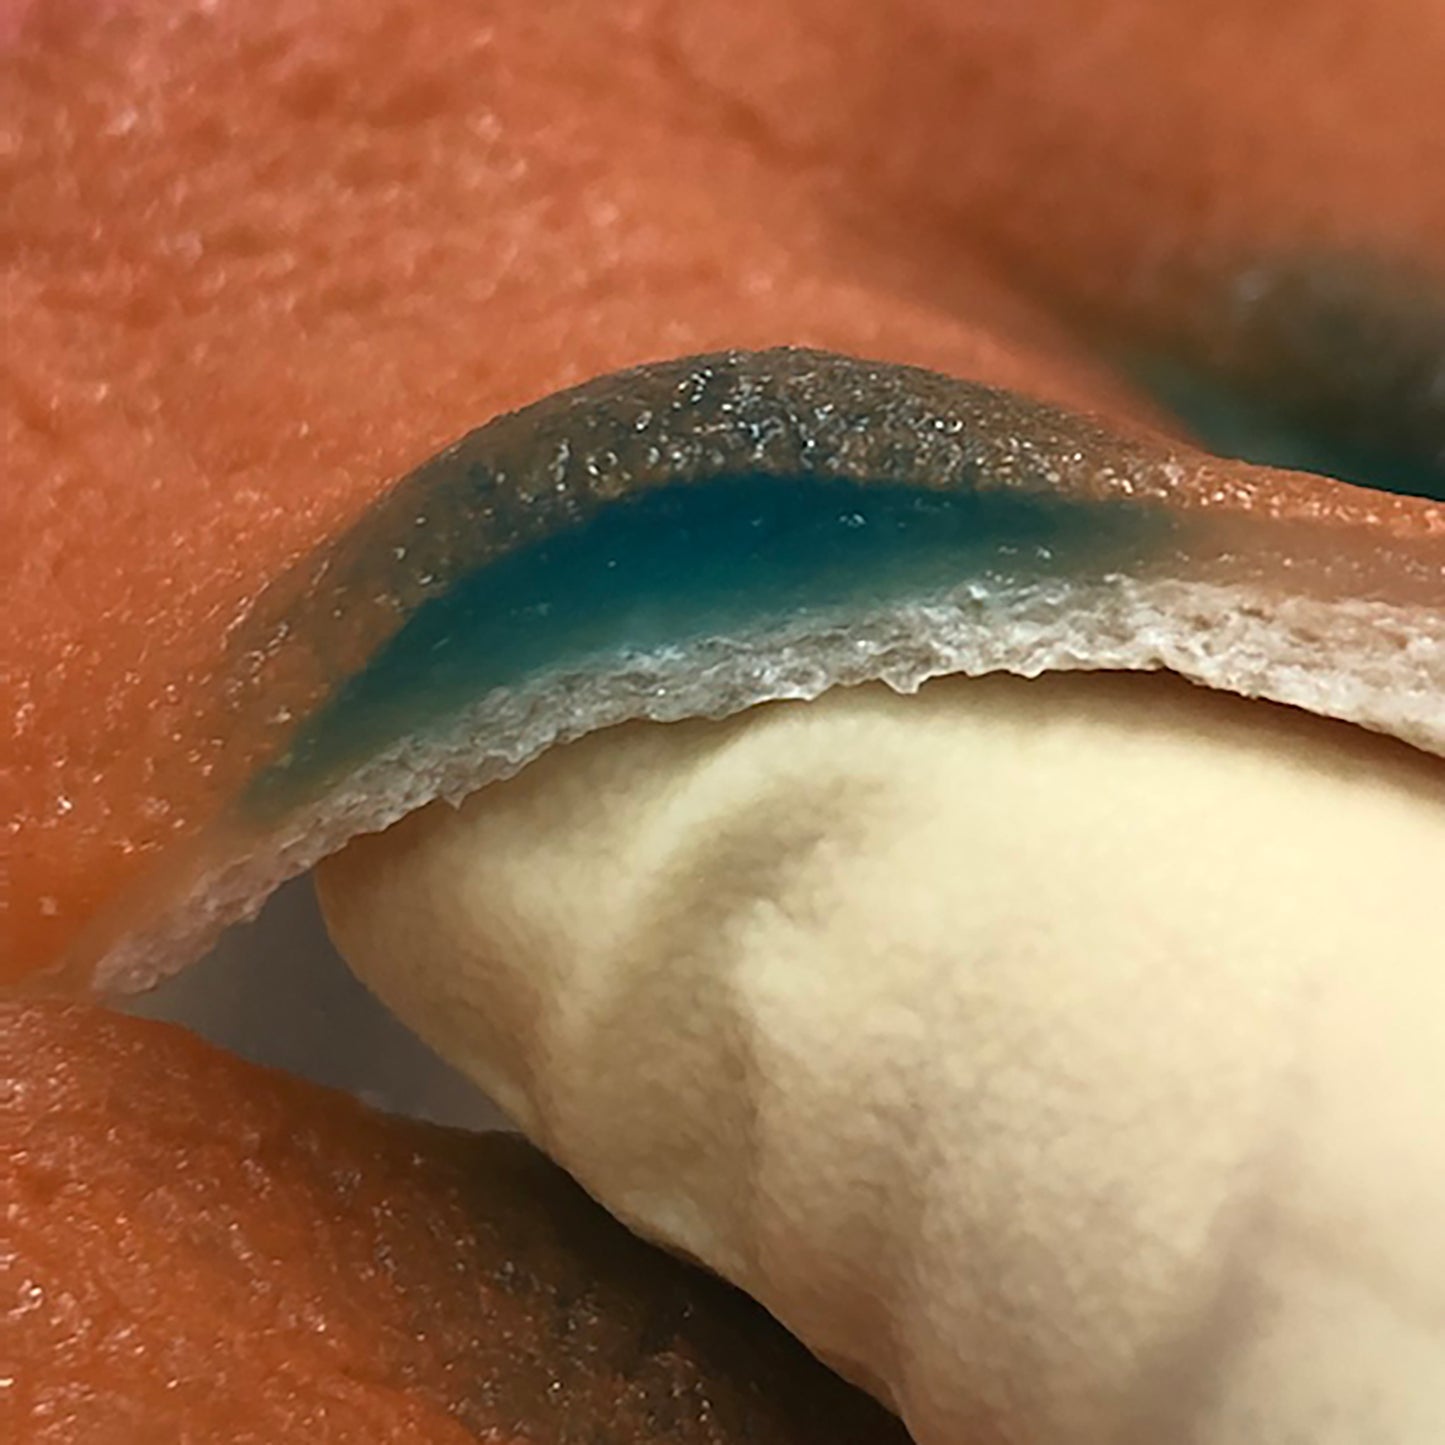 A gloved finger lifts a dissected section of the standard Mucosa Model. The VTT Injection Solution can be seen as a gel pocket injected into the submucosal layer. 